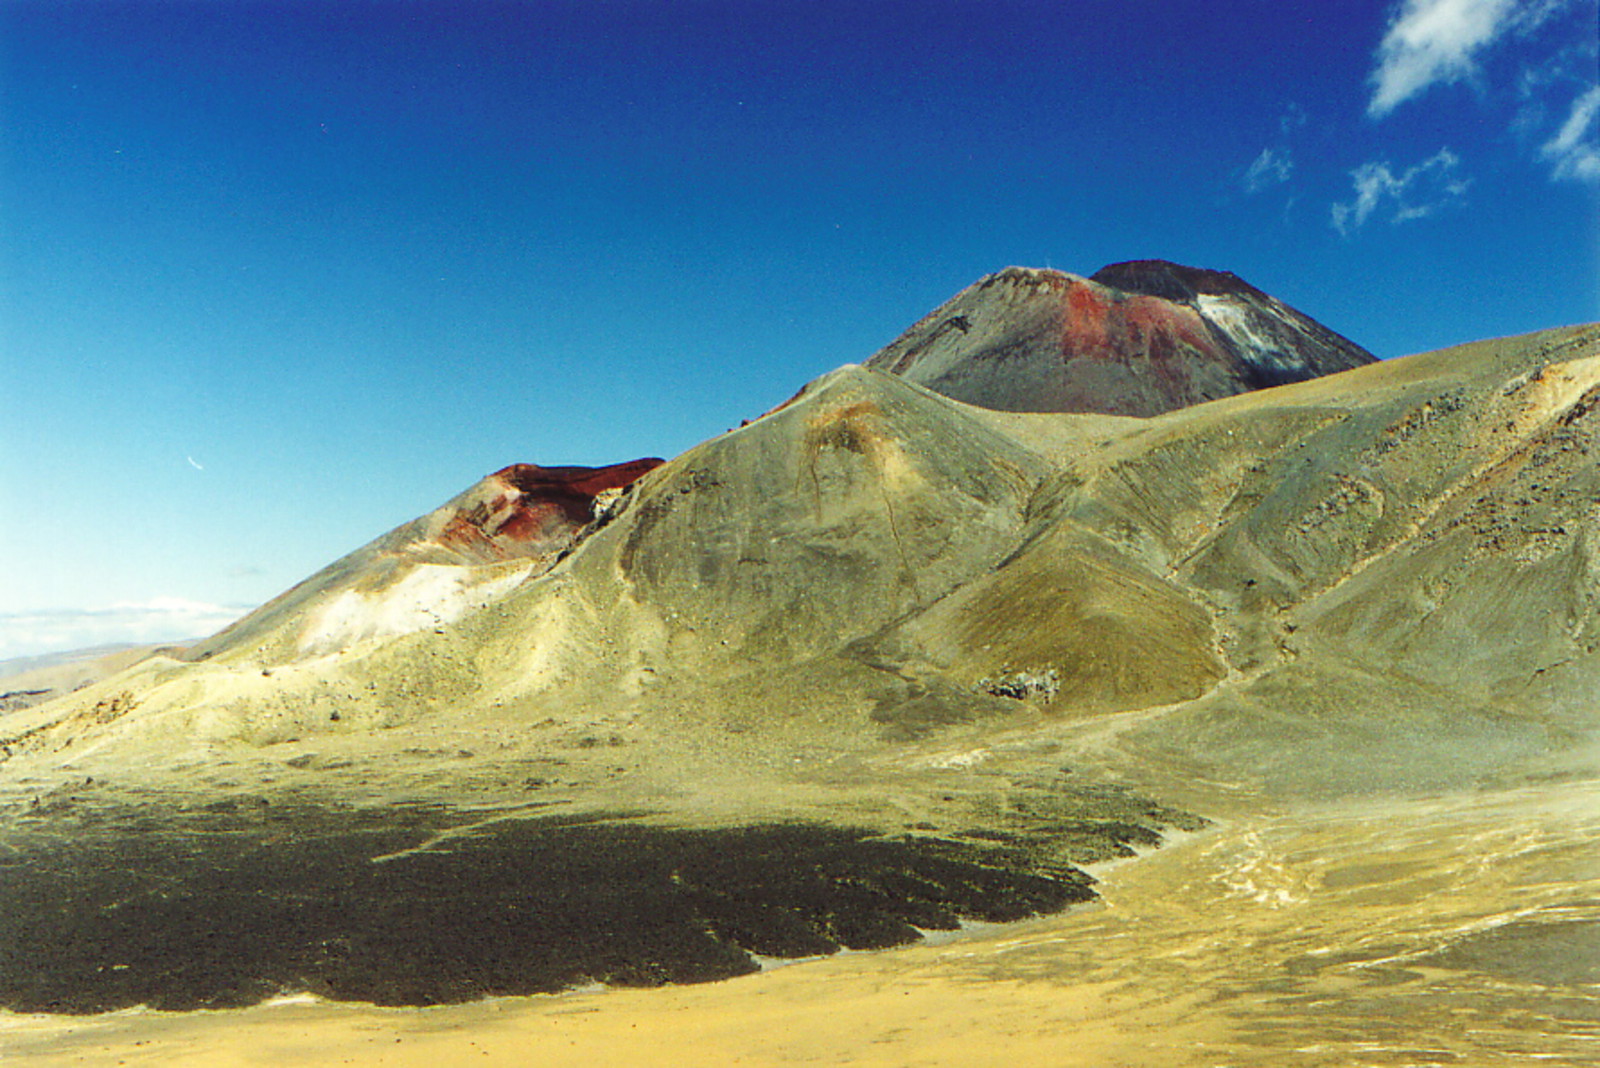 The central crater of Tongariro